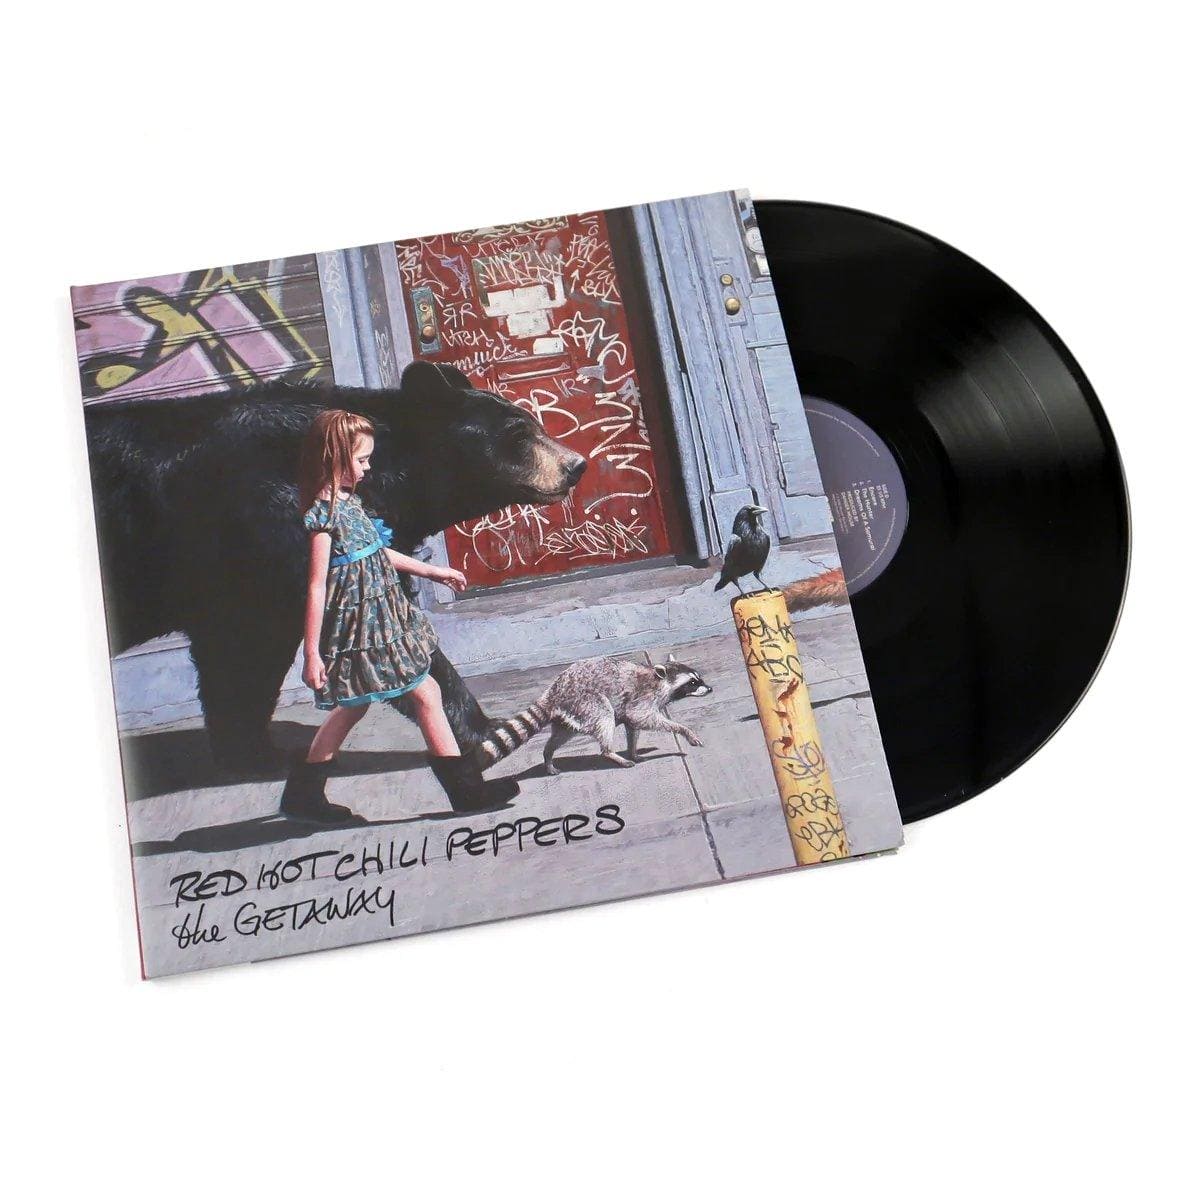 RED HOT CHILI PEPPERS - The Getaway Vinyl - JWrayRecords